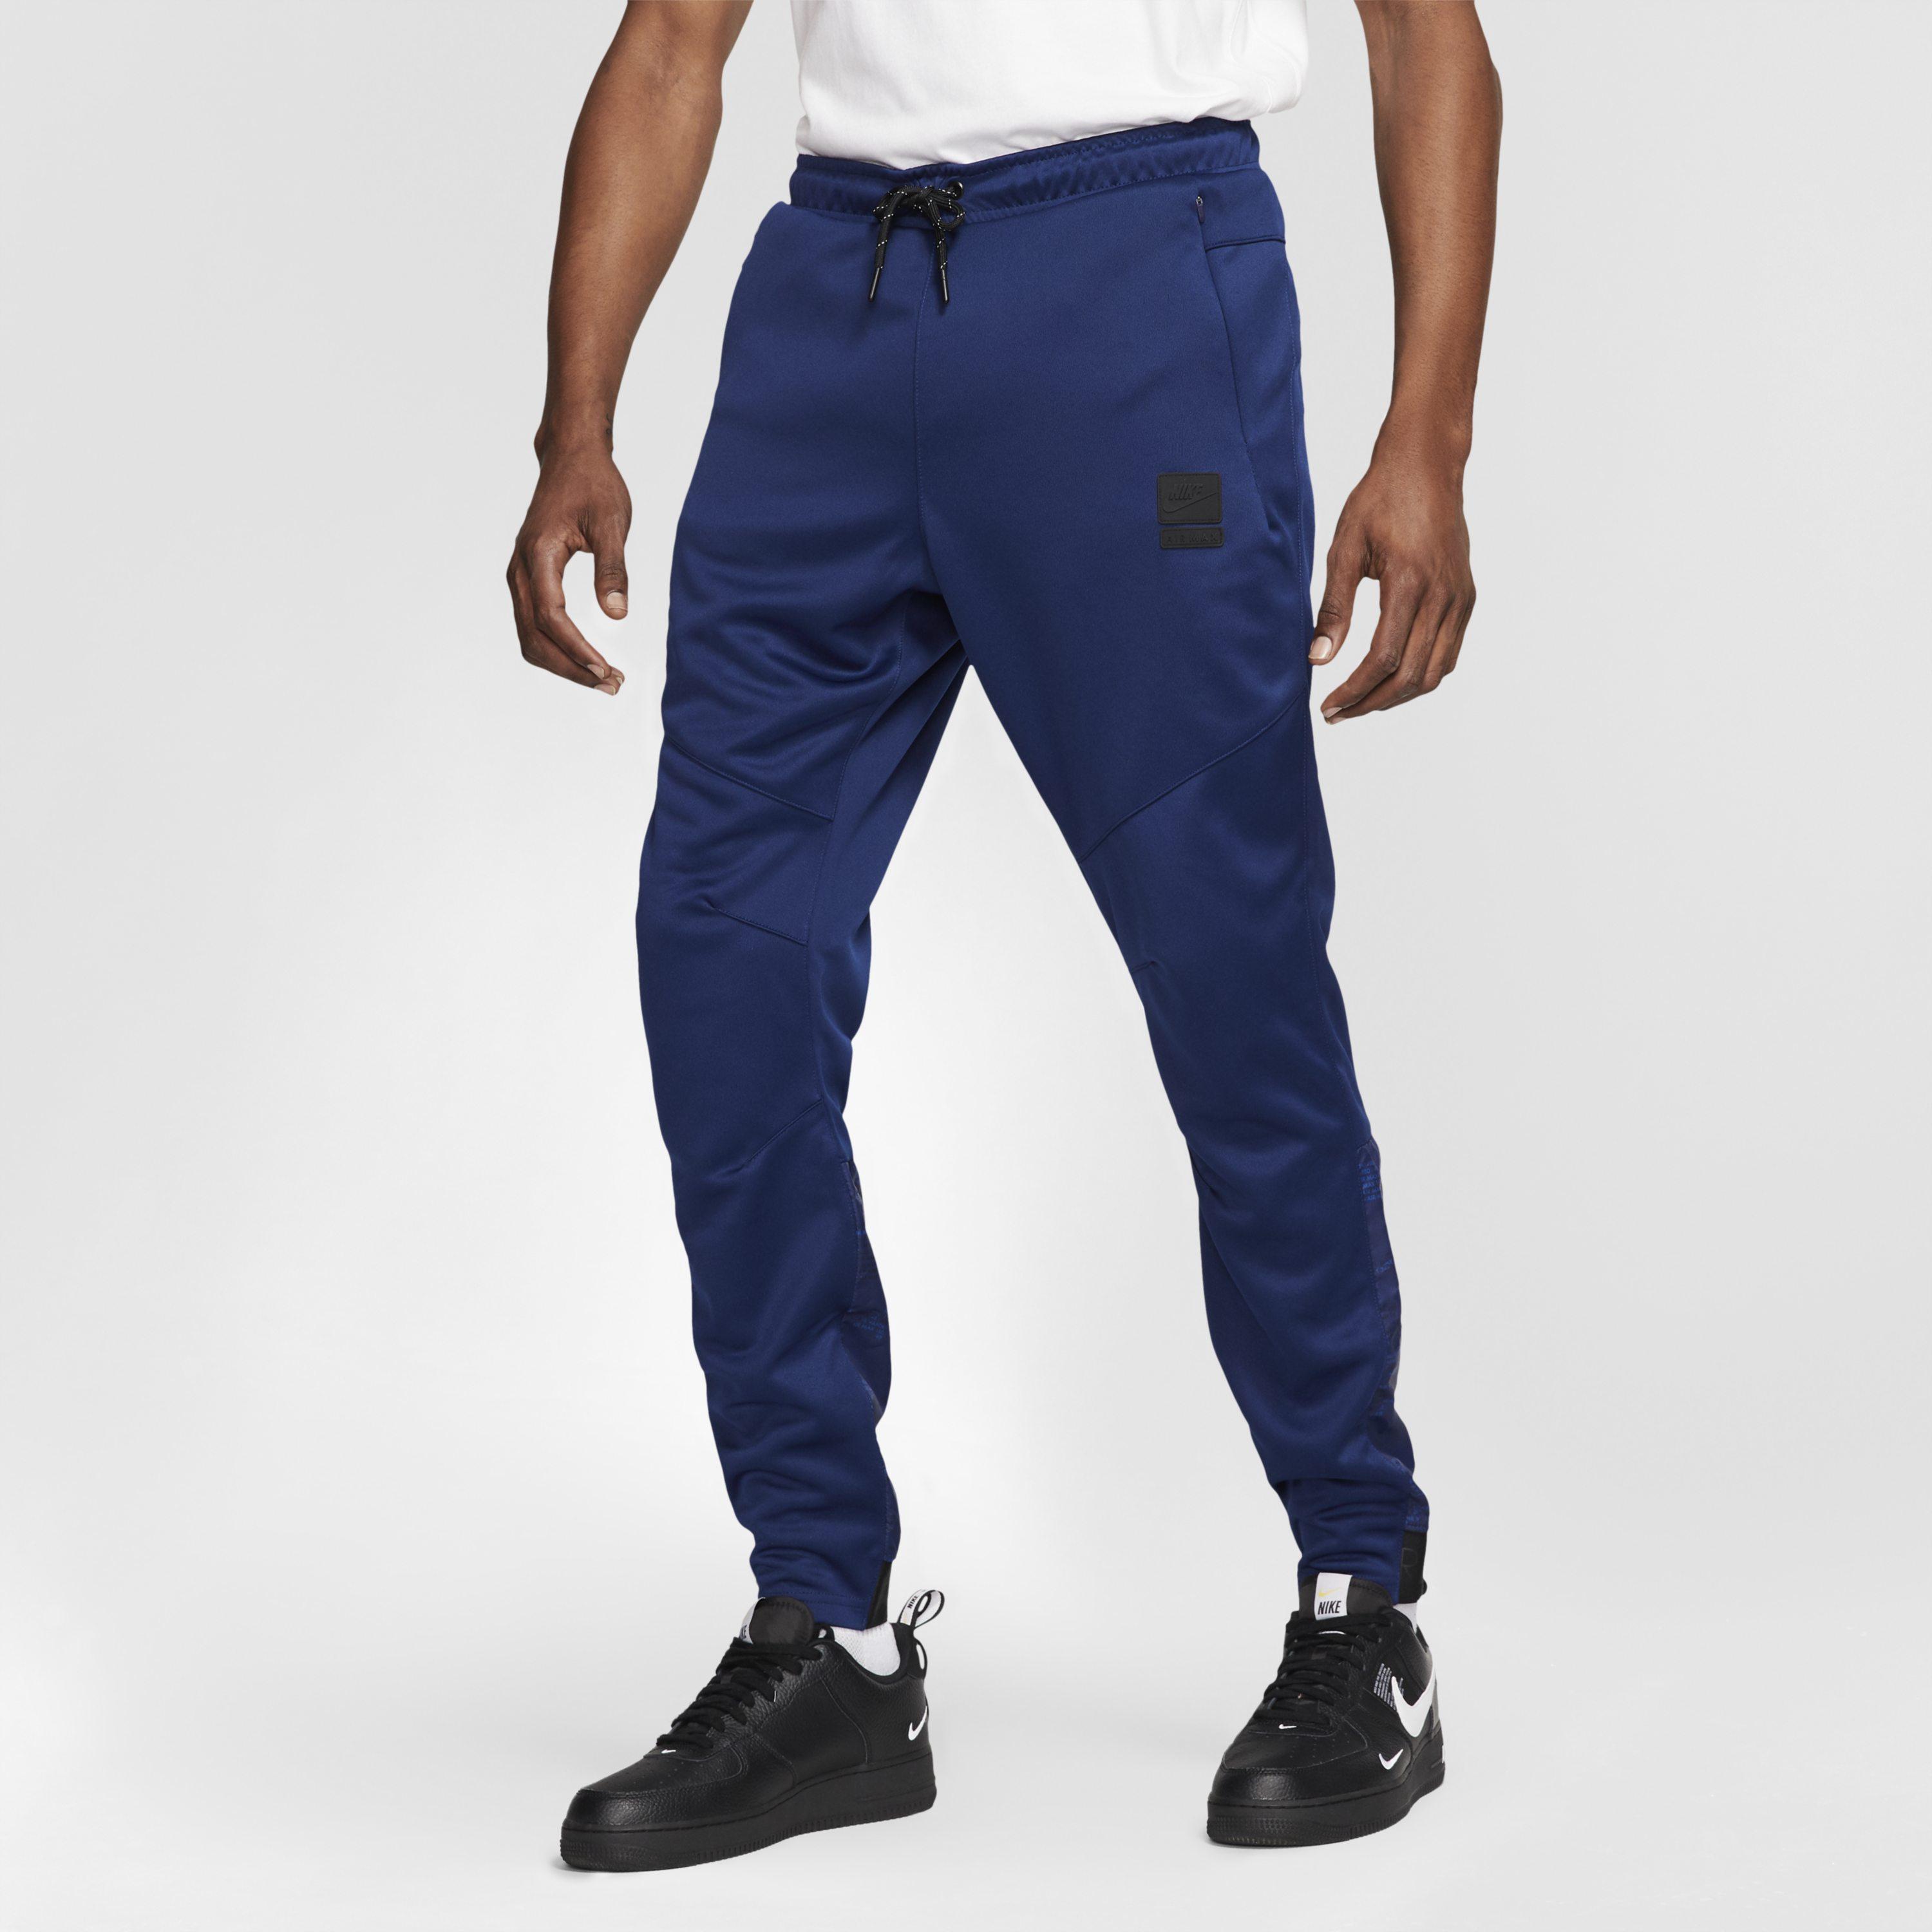 Nike Air Max Joggers in Blue for Men - Lyst